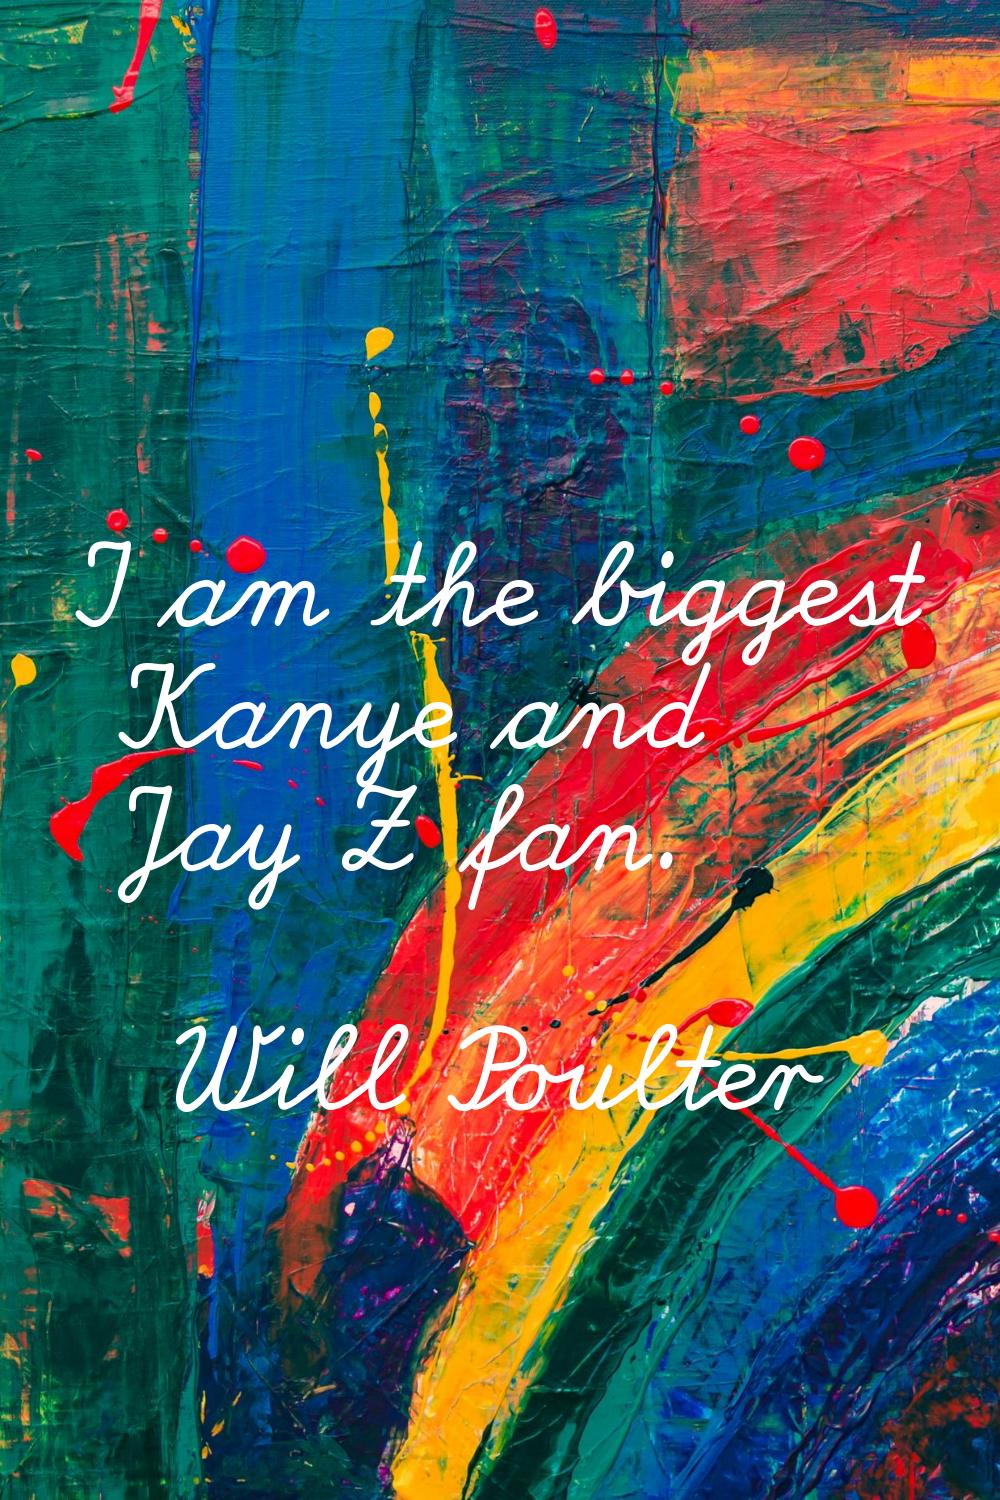 I am the biggest Kanye and Jay Z fan.